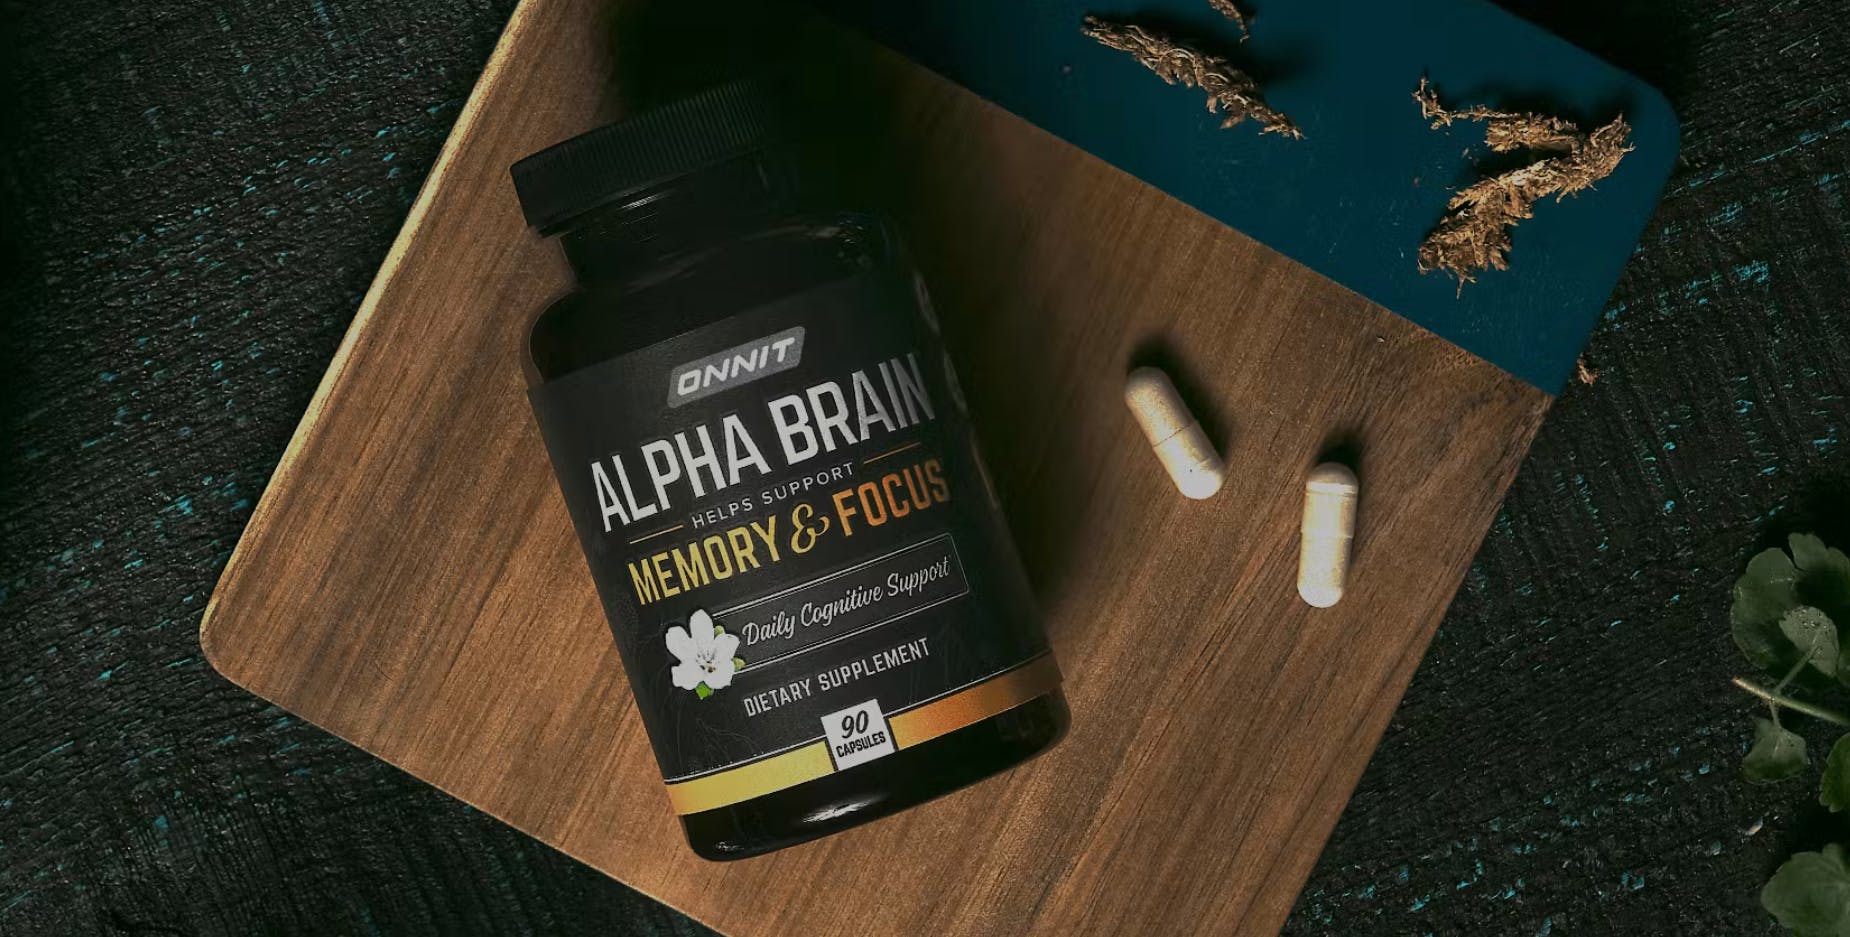 Alpha BRAIN Instant Review - Good Morning Option